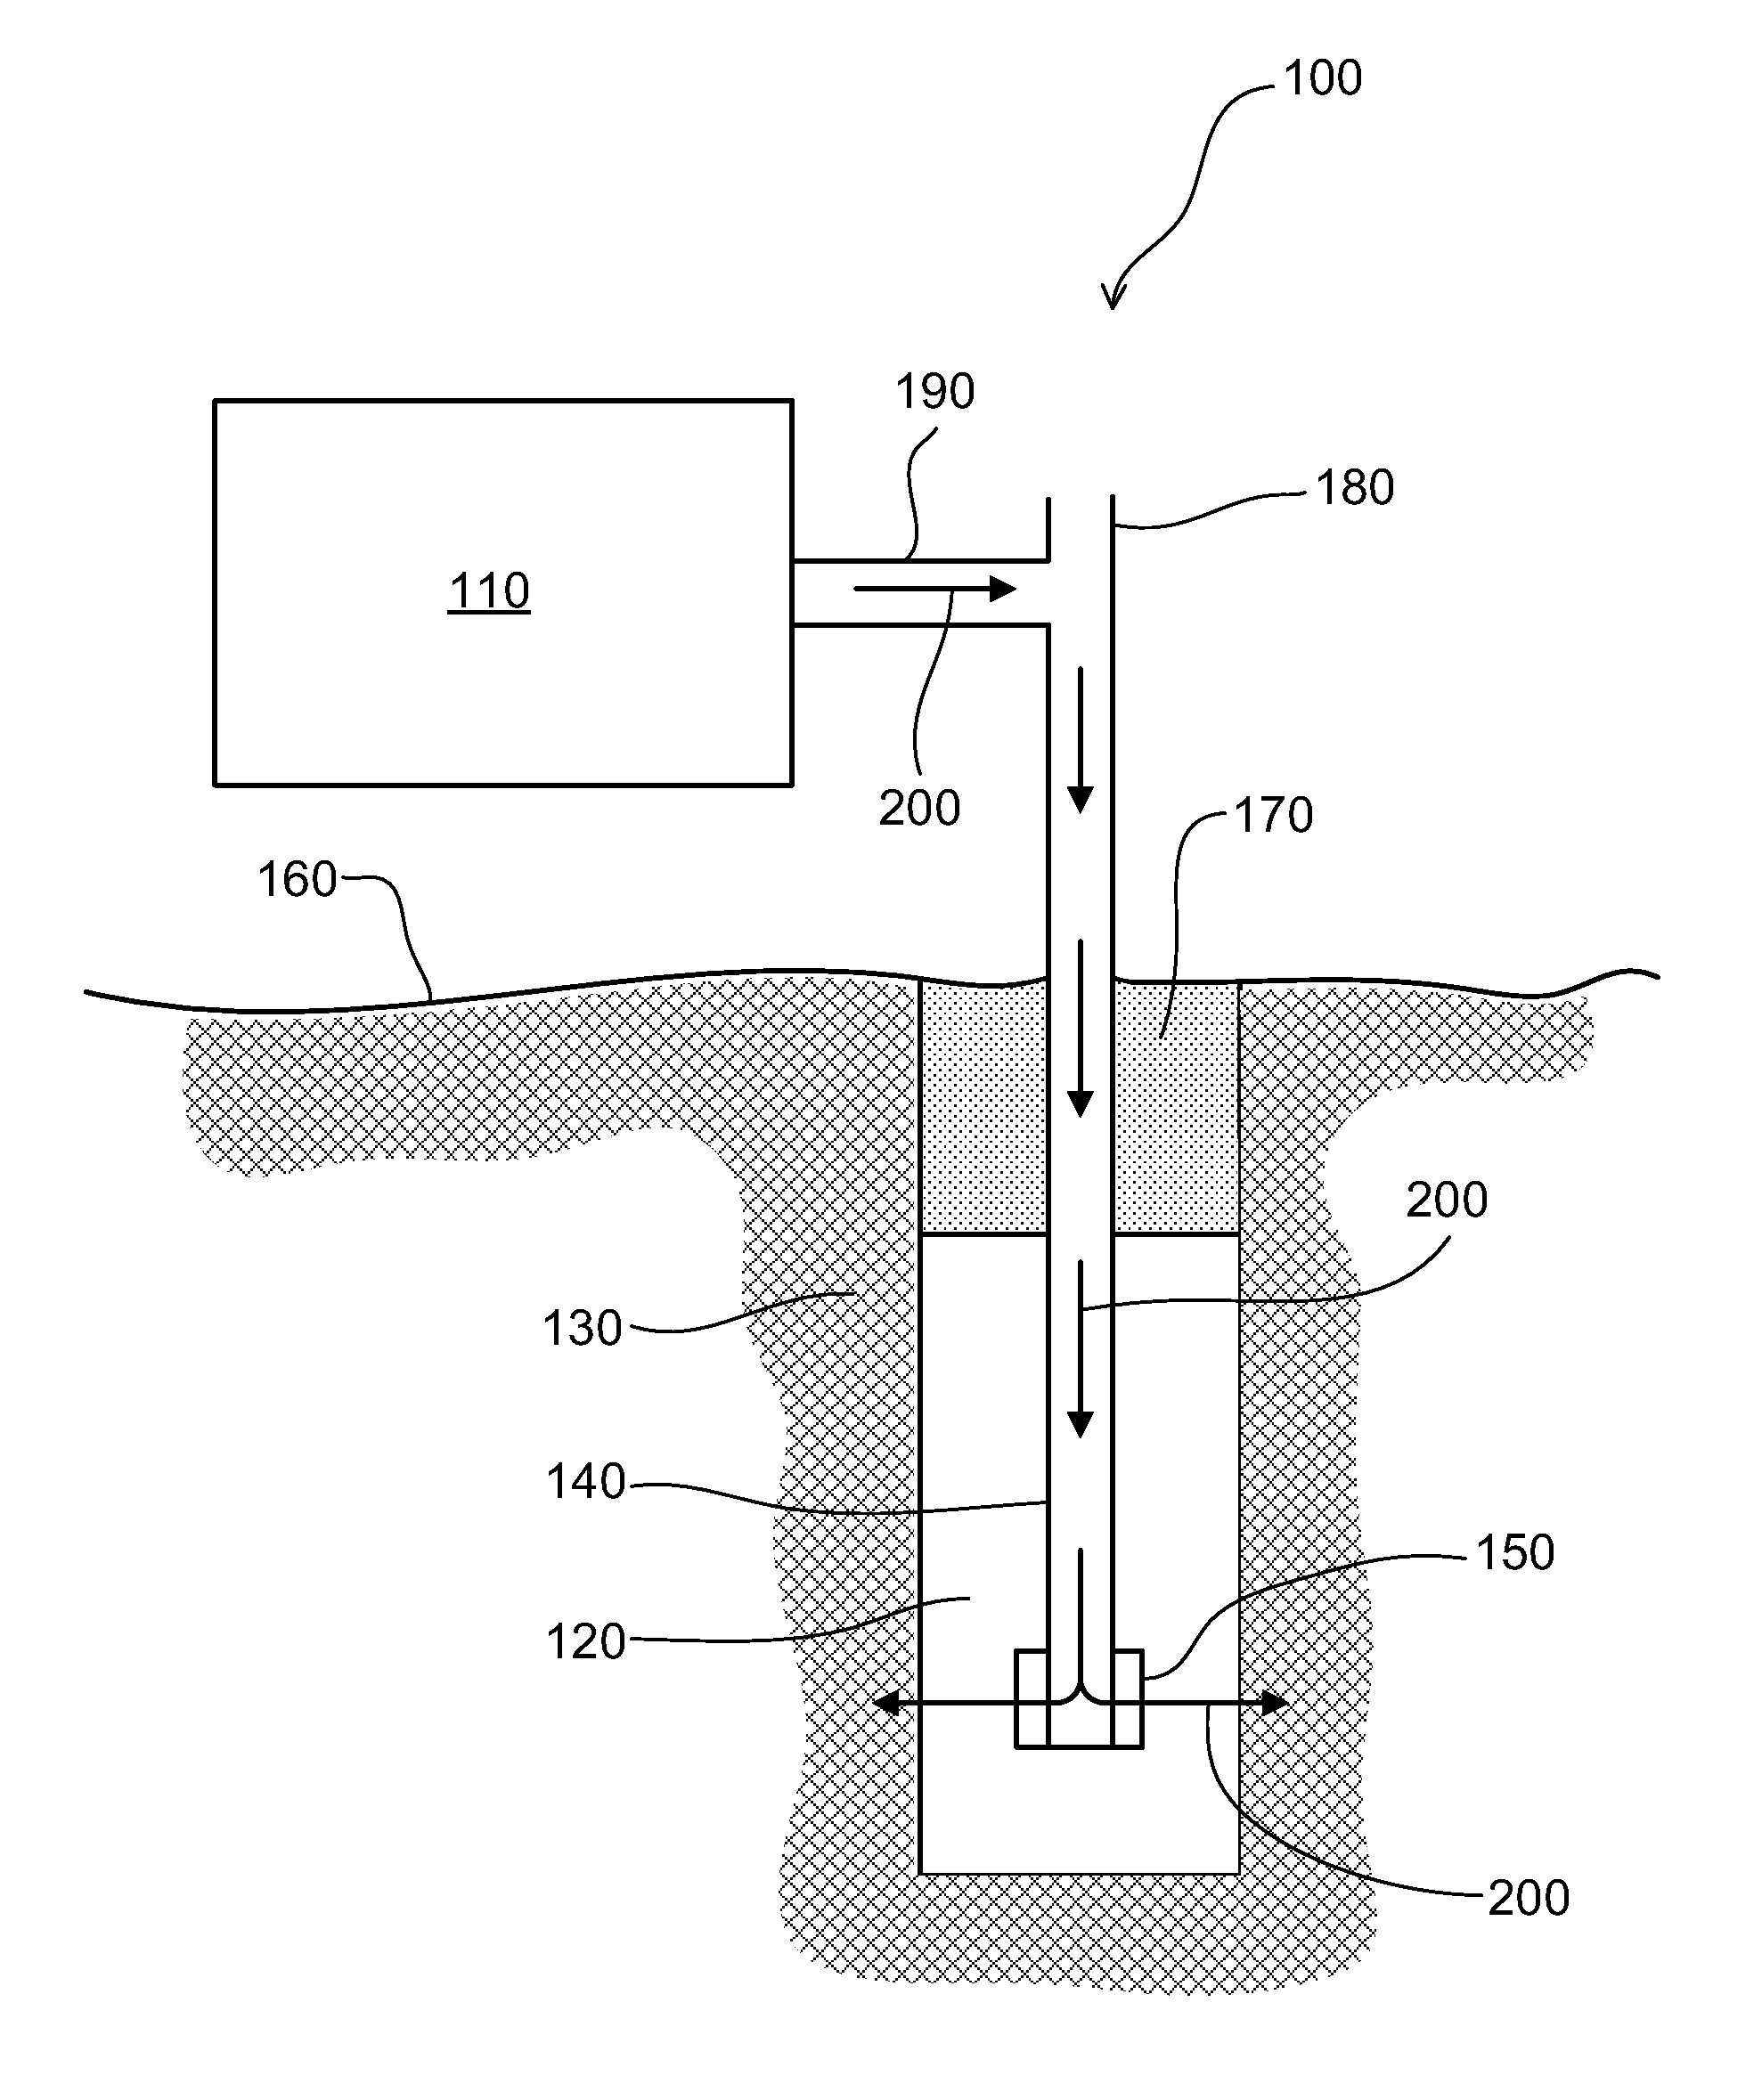 Method and system for servicing a wellbore